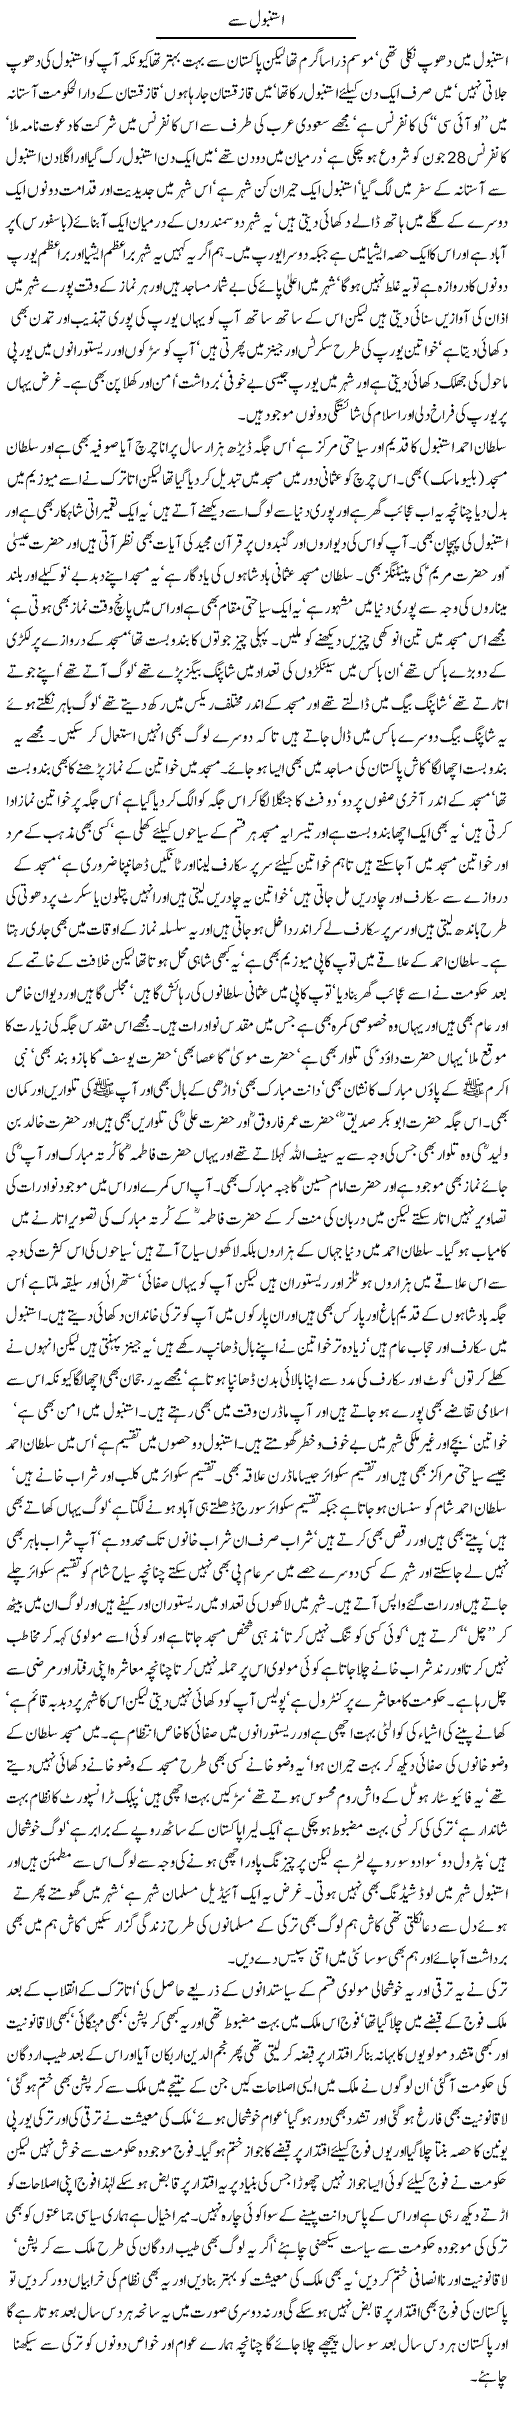 From Turkey Express Column Javed Chaudhry 30 June 2011